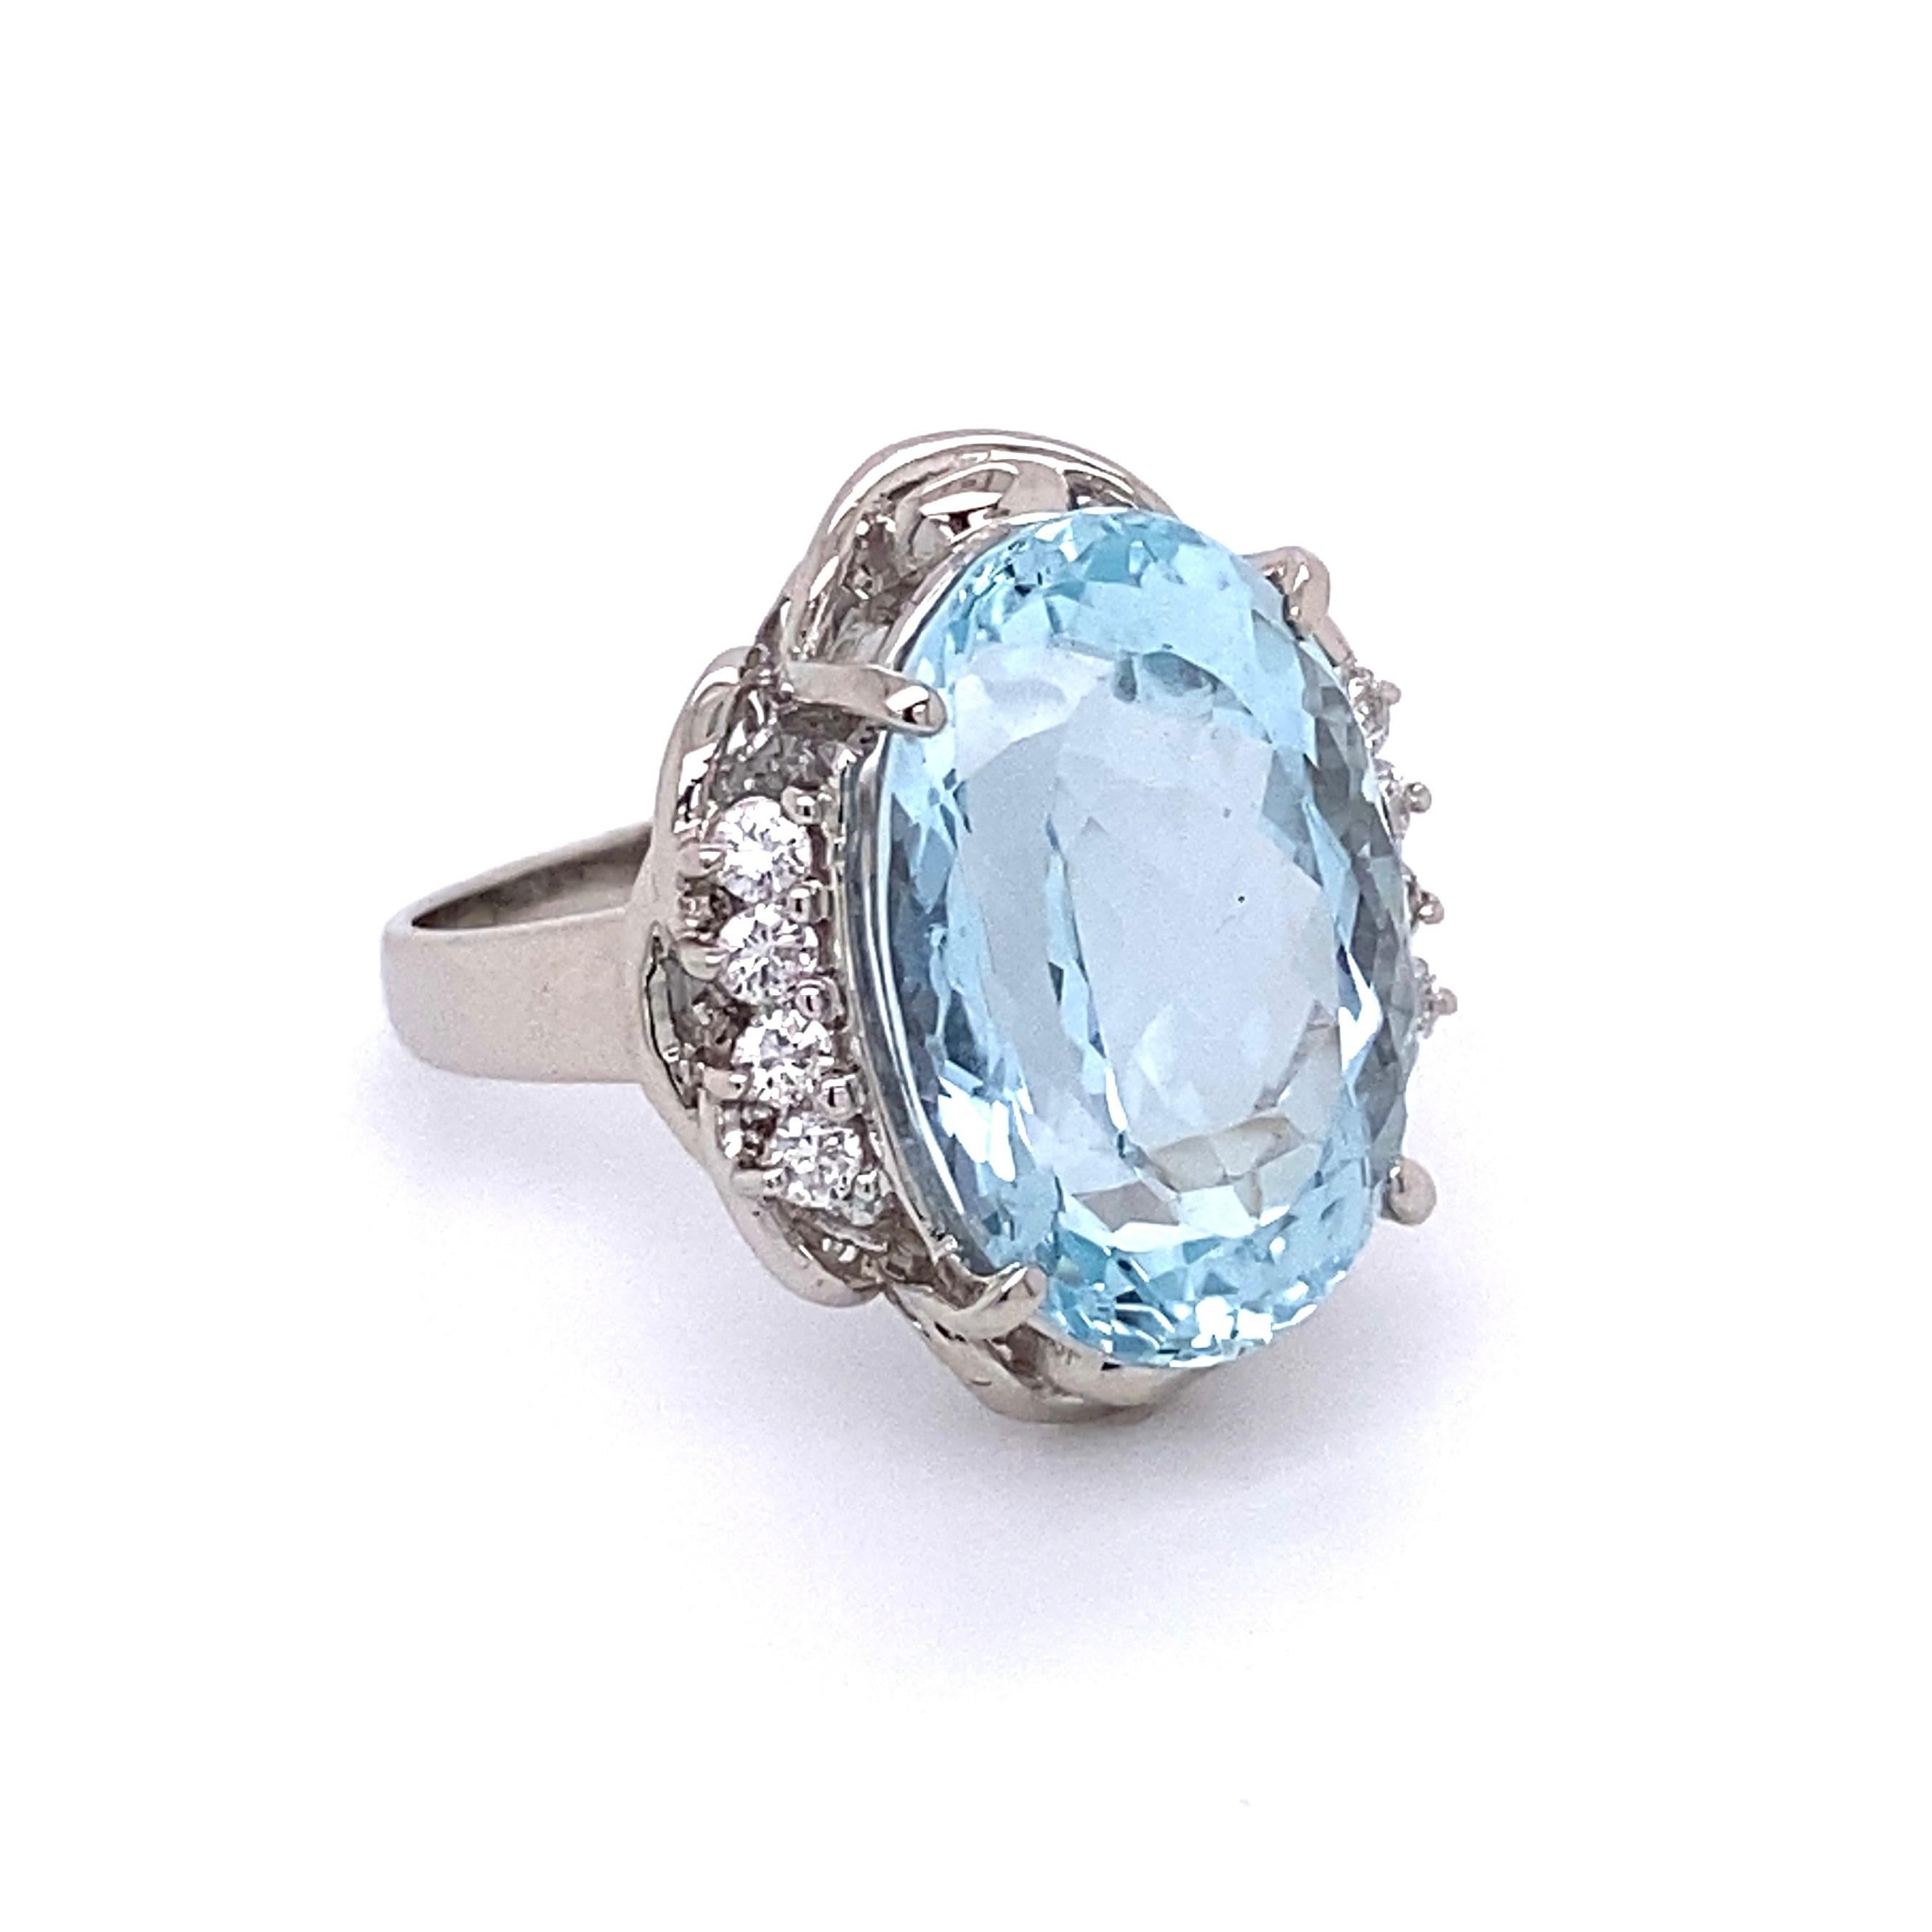 Simply Beautiful! Aquamarine and Diamond Cocktail Ring centering a securely nestled Hand set Oval Aquamarine weighing approx. 10.92 Carats, enhanced with Diamonds on either side, approx. 0.23tcw. Hand crafted Platinum mounting. Dimensions: 1.52: l x